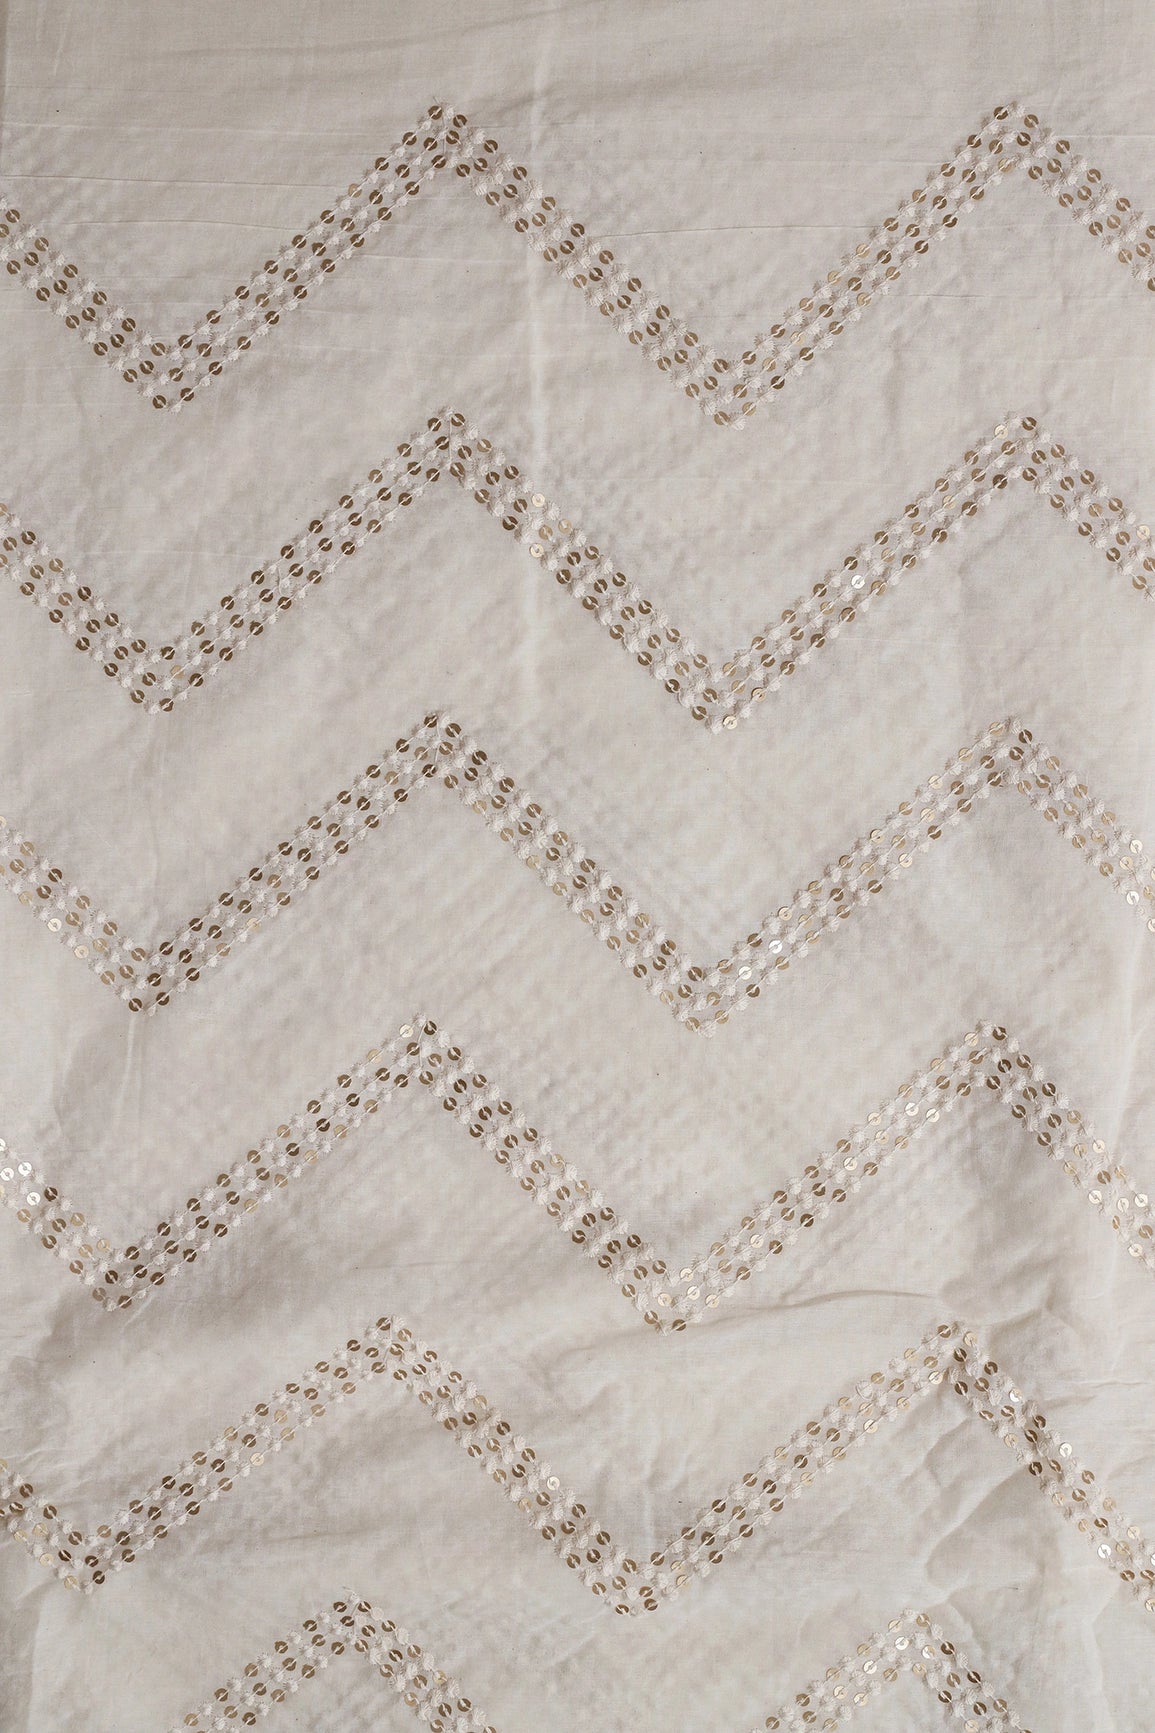 White Thread With Gold Sequins Beautiful Chevron Embroidery Work On Off White Organic Cotton Fabric - doeraa